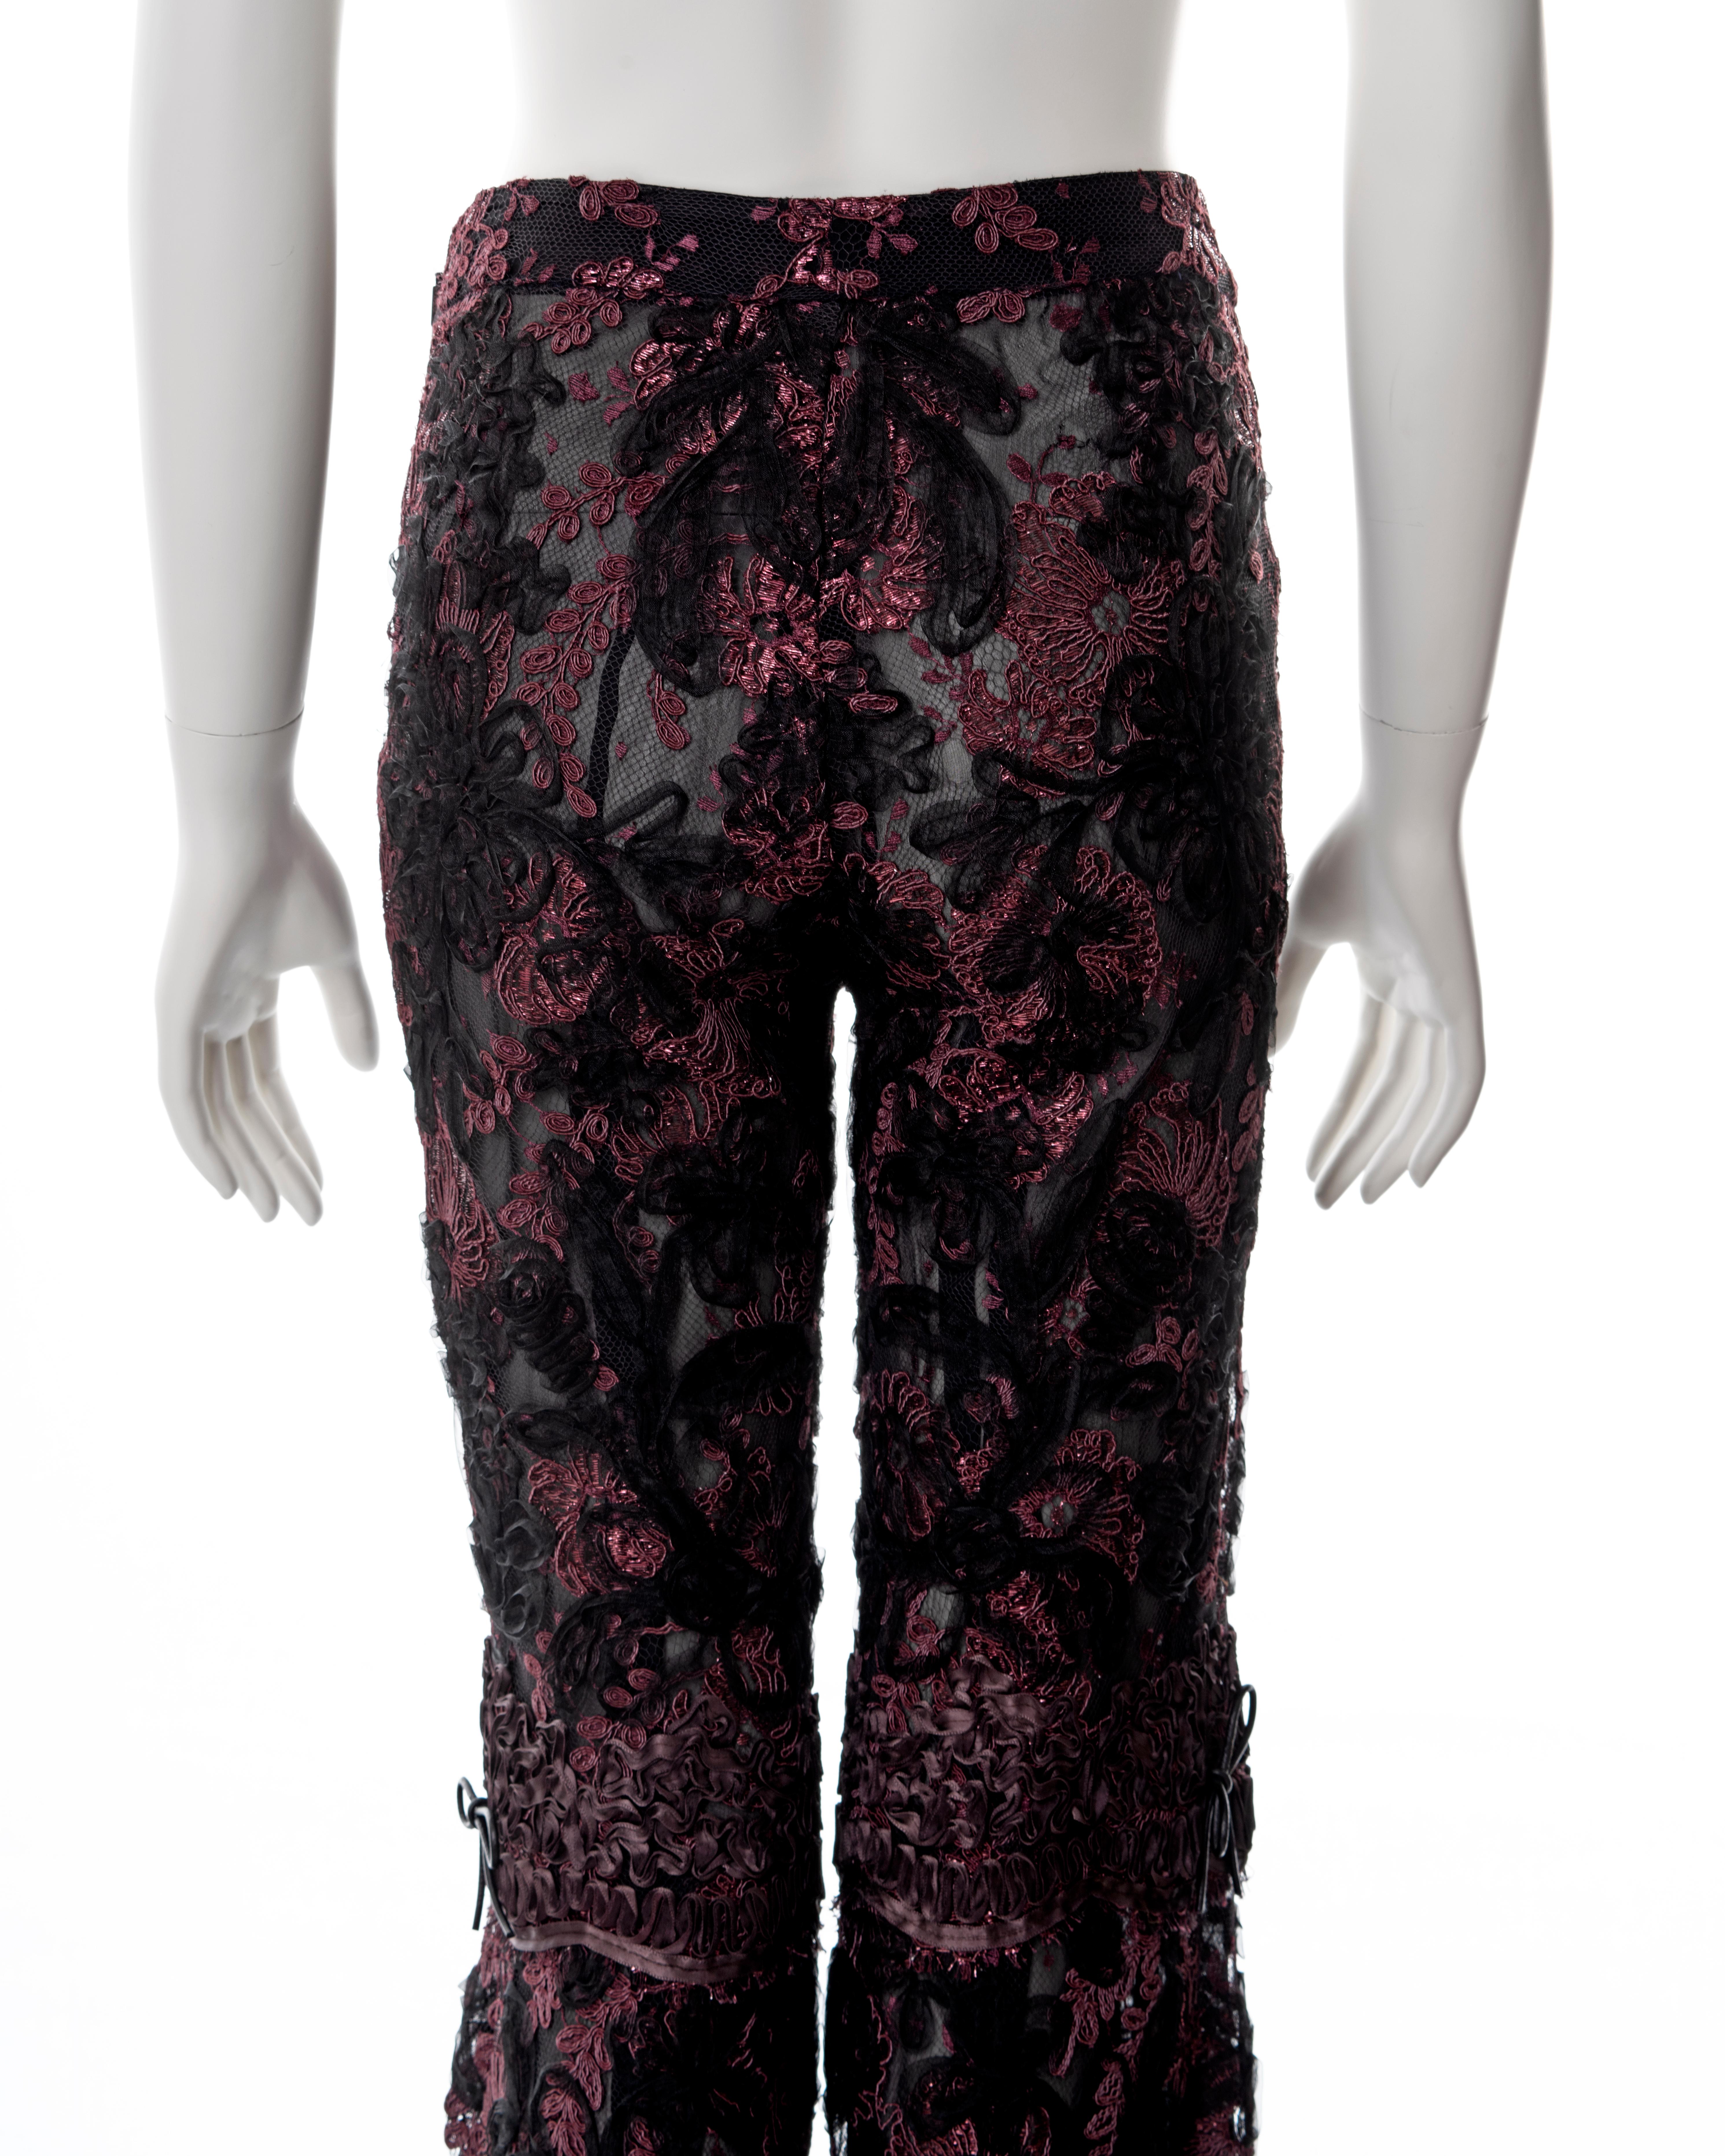 Gucci by Tom Ford burgundy lamé floral lace flared evening pants, fw 1999 For Sale 3